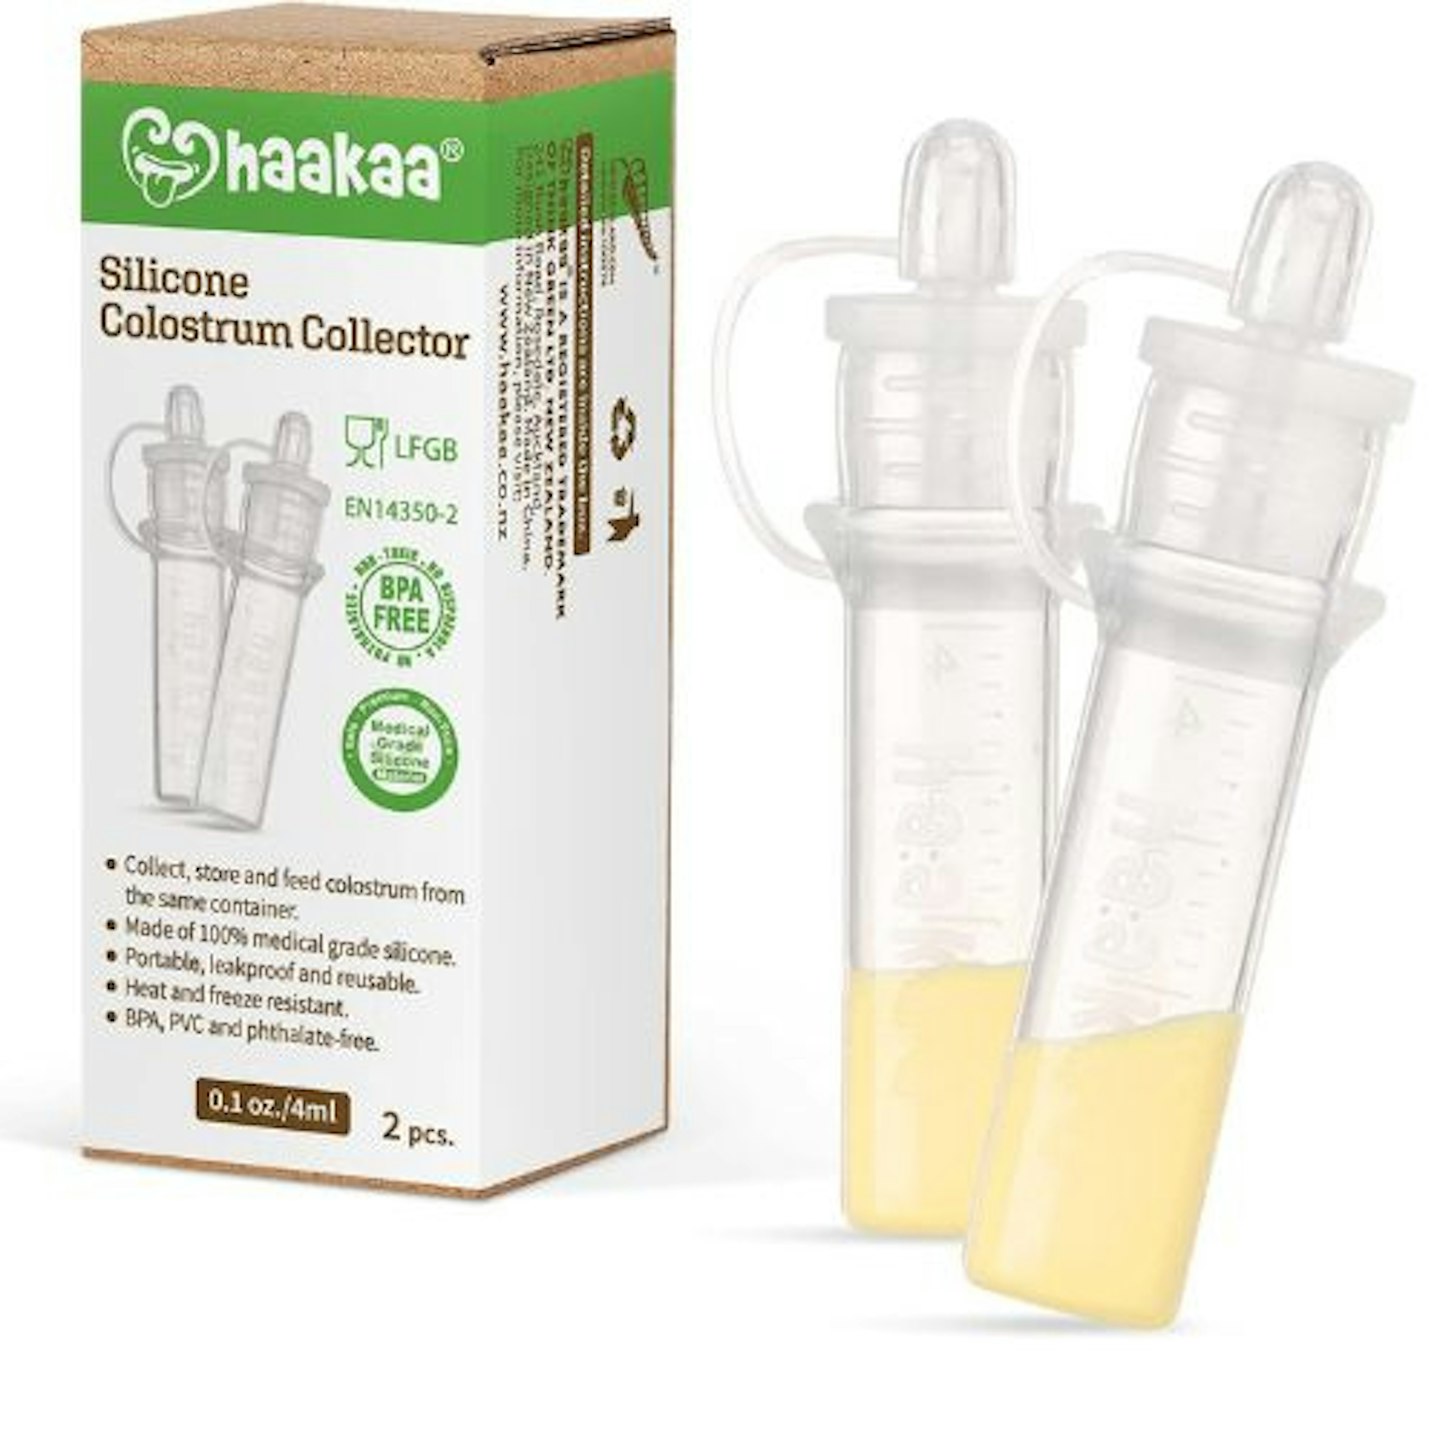 haakaa Silicone Colostrum Collectors 2 PCS Set 